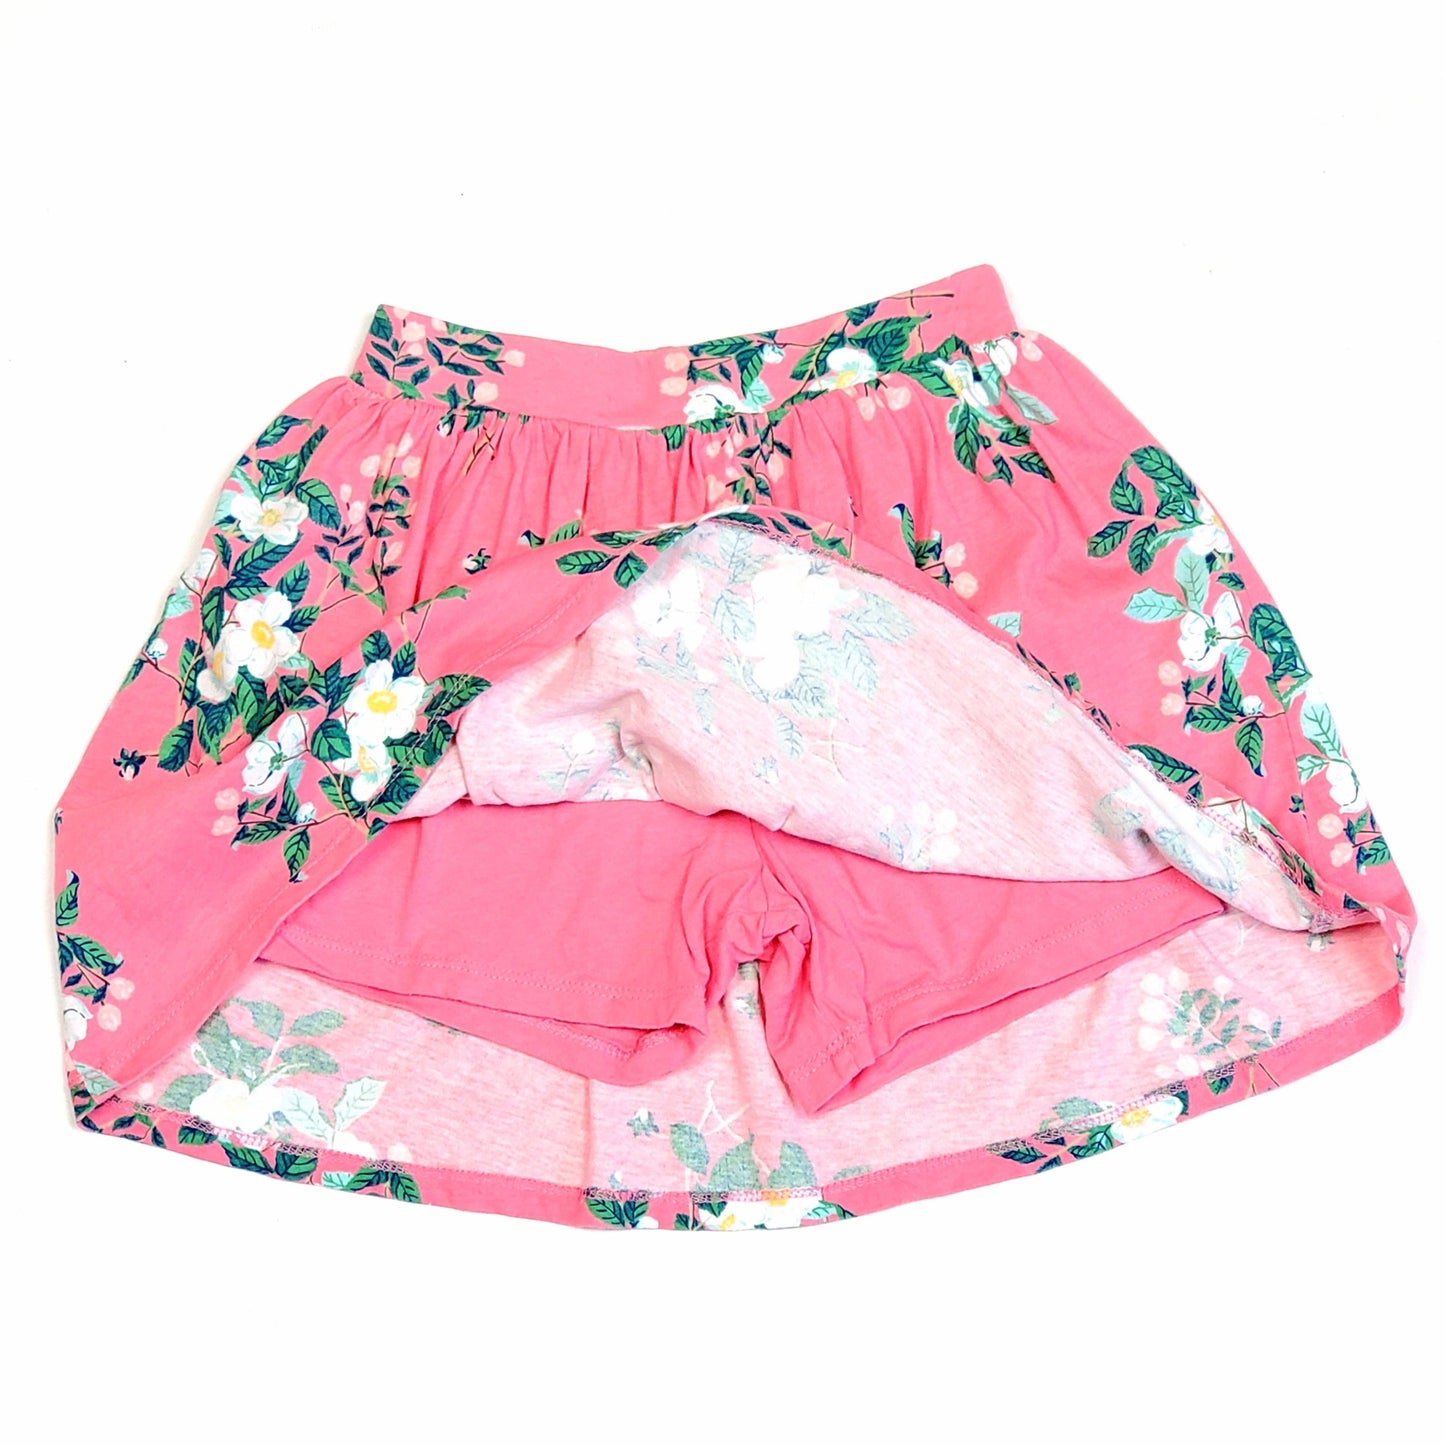 Carters Girls Pink Floral Skort Size 8 Used View 2